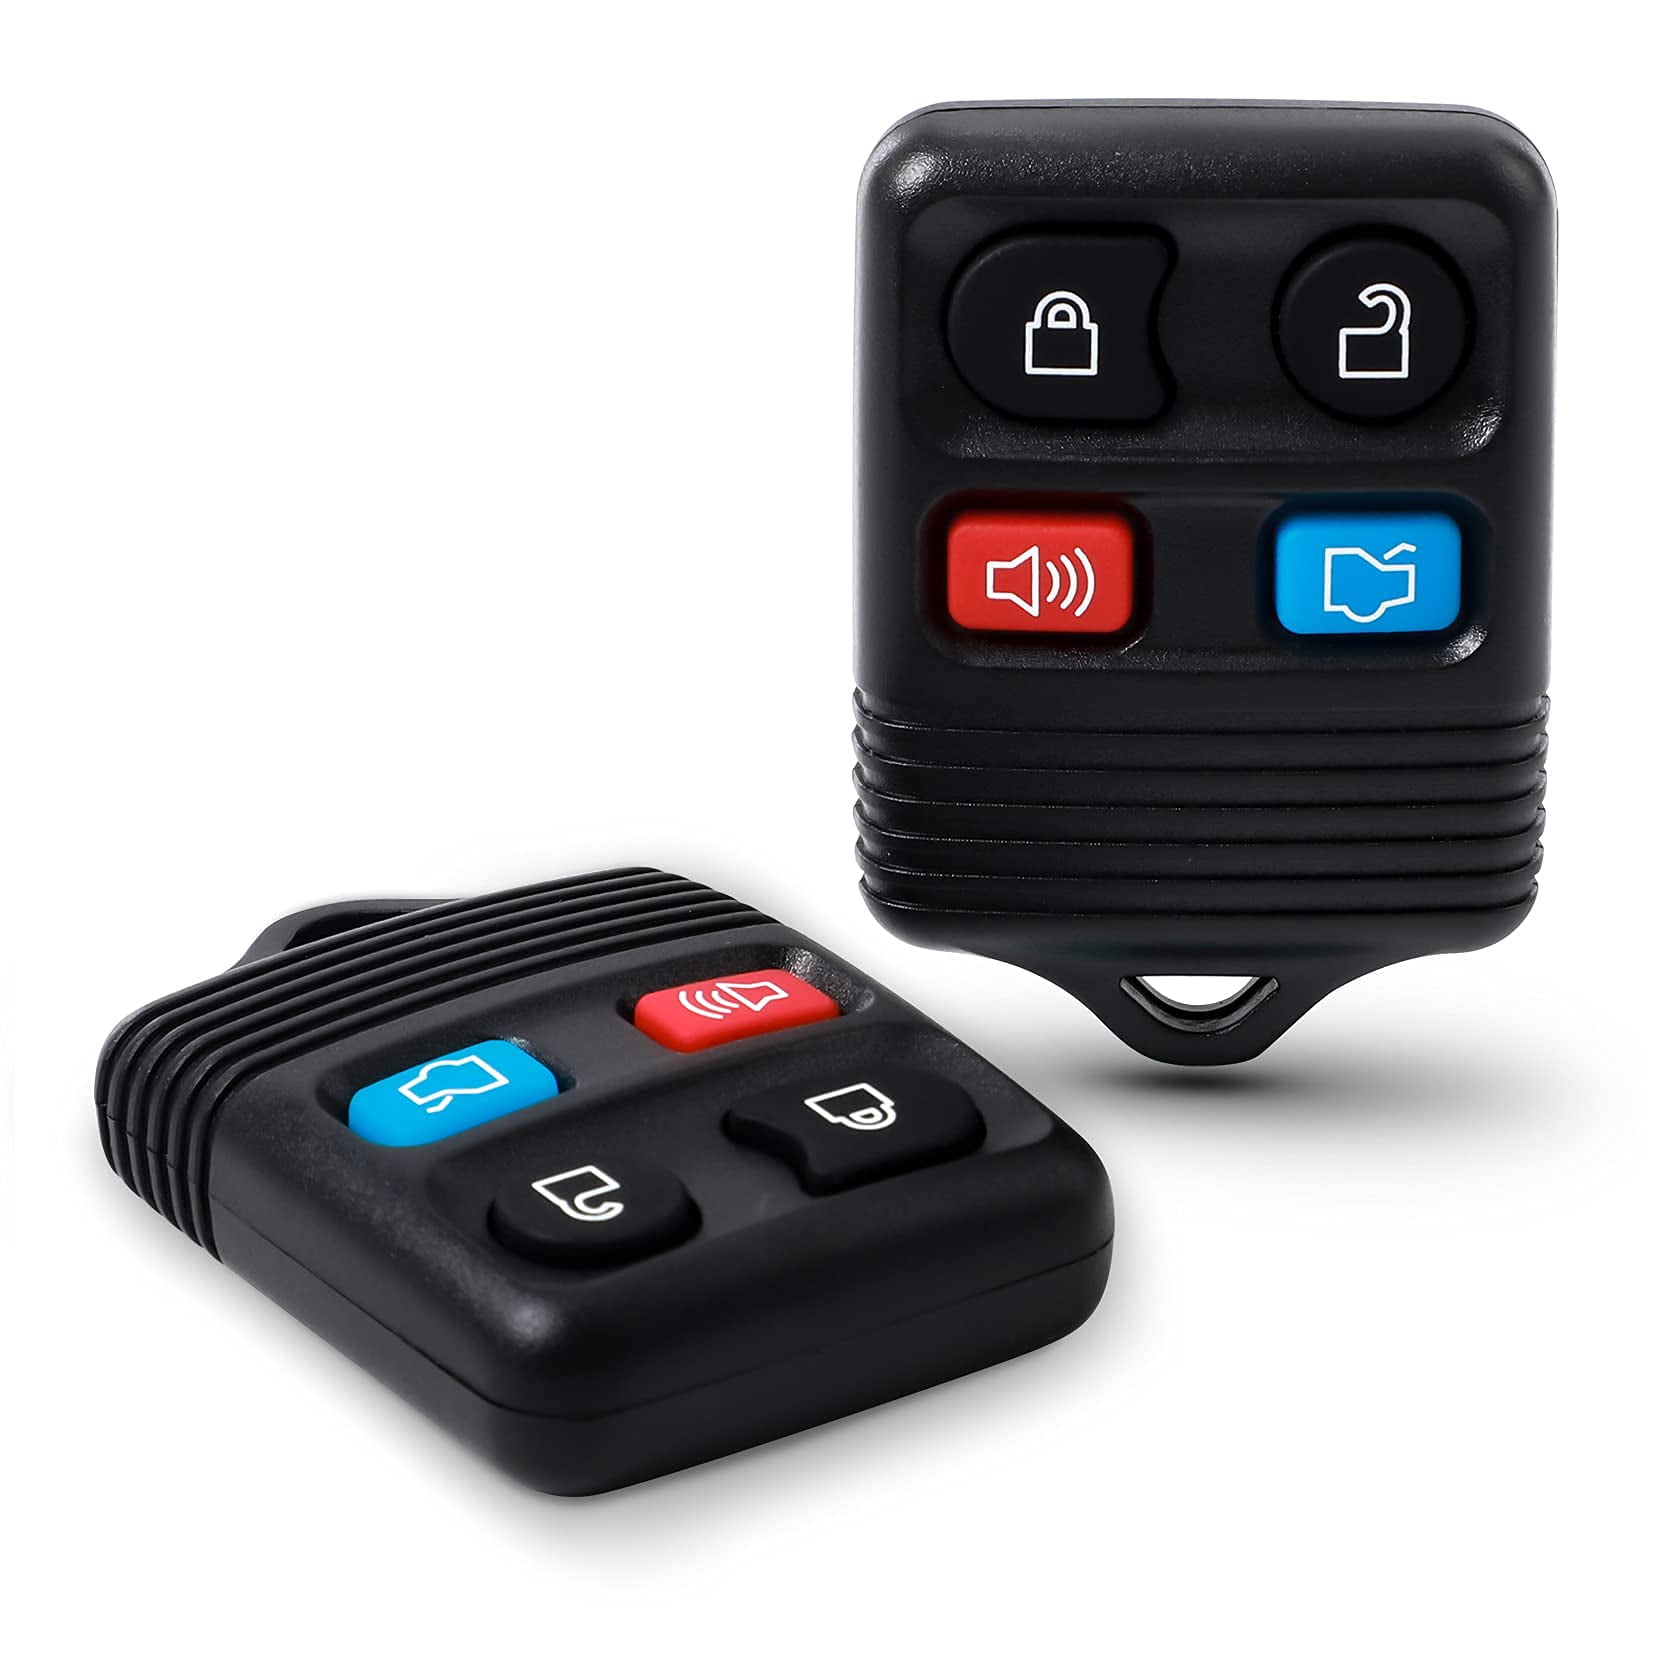 2 KeylessOption Red Replacement 3 Button Keyless Entry Remote Control Key Fob Clicker 